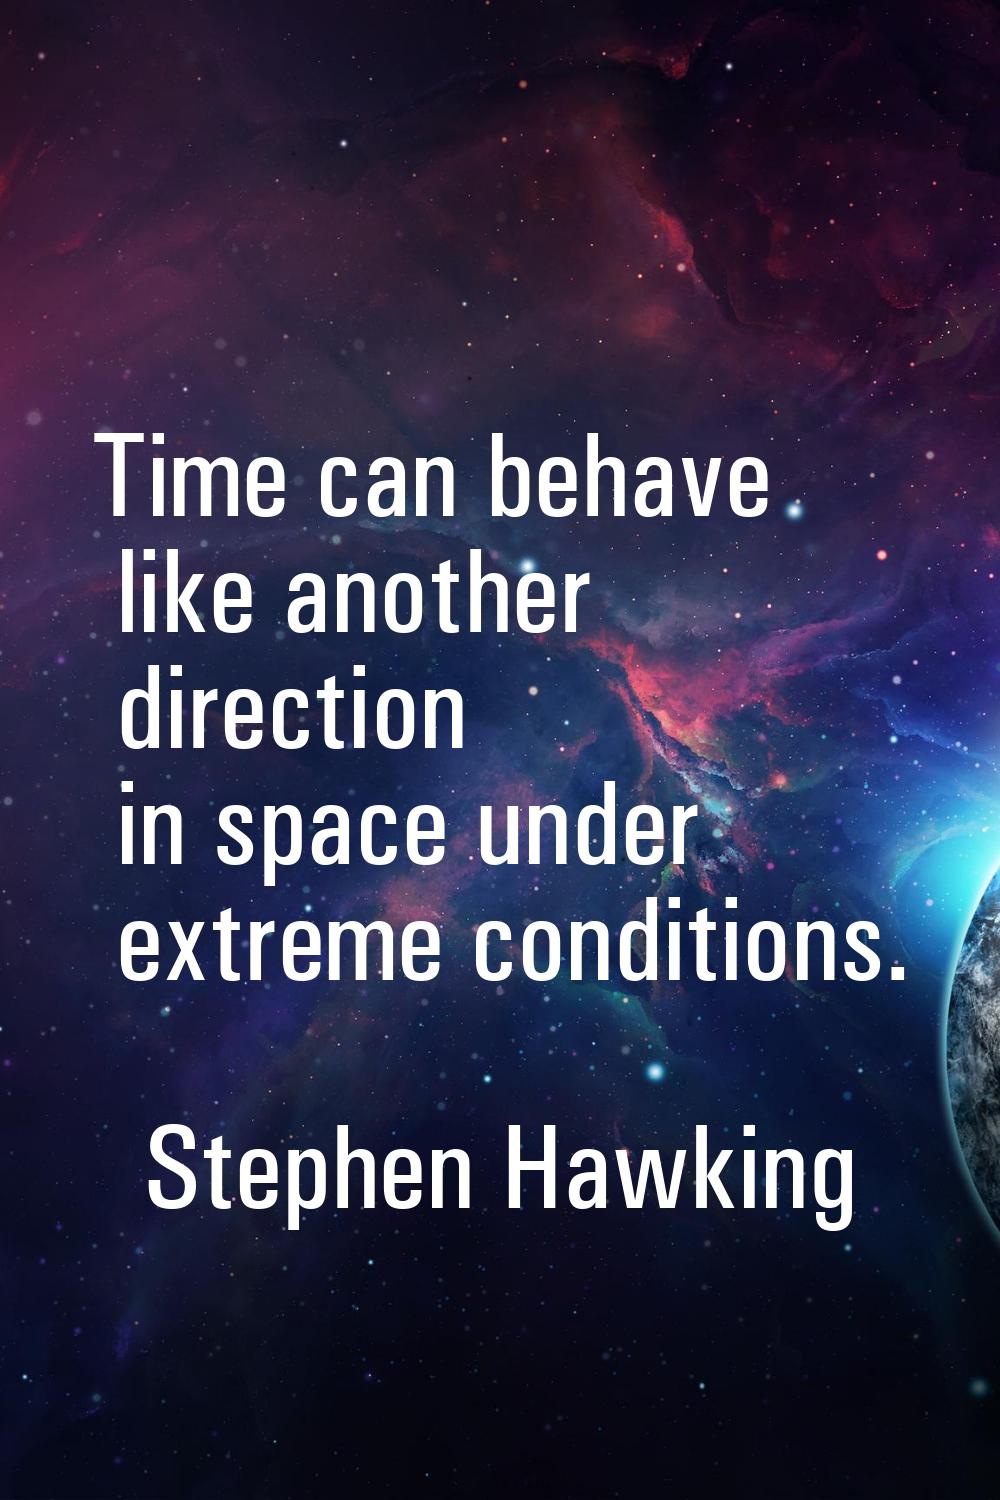 Time can behave like another direction in space under extreme conditions.